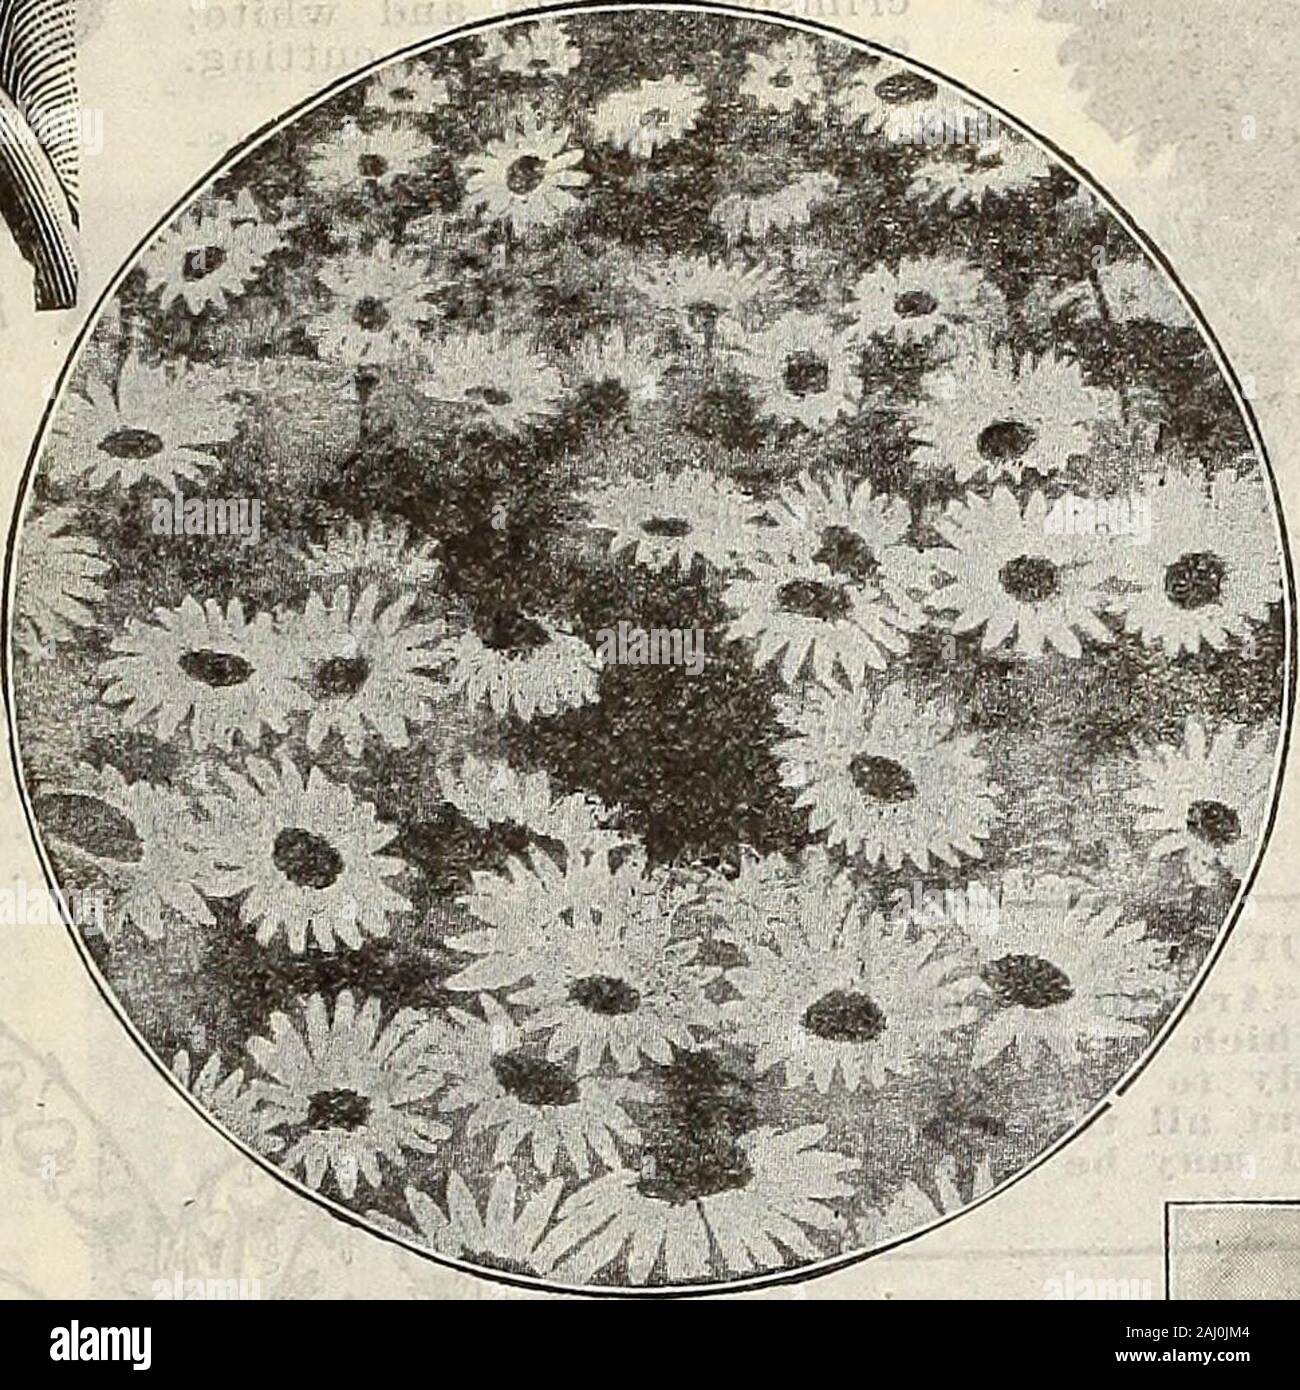 Farm and garden annual : spring 1907 . rdy Marguerites are now general favoritesand in great demand. Few plants are more usful forthe production of flowers for cutting, and none aremore sliowy in the garden. They are very easilygrown, succeeding well in any good garden soil.C Maximum—1 foot. Very desirable variety,producing great quantities of flowers all sum-mer. Each 10c; per doz ,. .$1.00 C Leucantliemum Hybritluni, or Shasta Daisy—This new hardy Daisy is a great acquisition inthe flower garden. It blooms con-tinuously throughout the summer,producing in great abundance itslarge pure white s Stock Photo